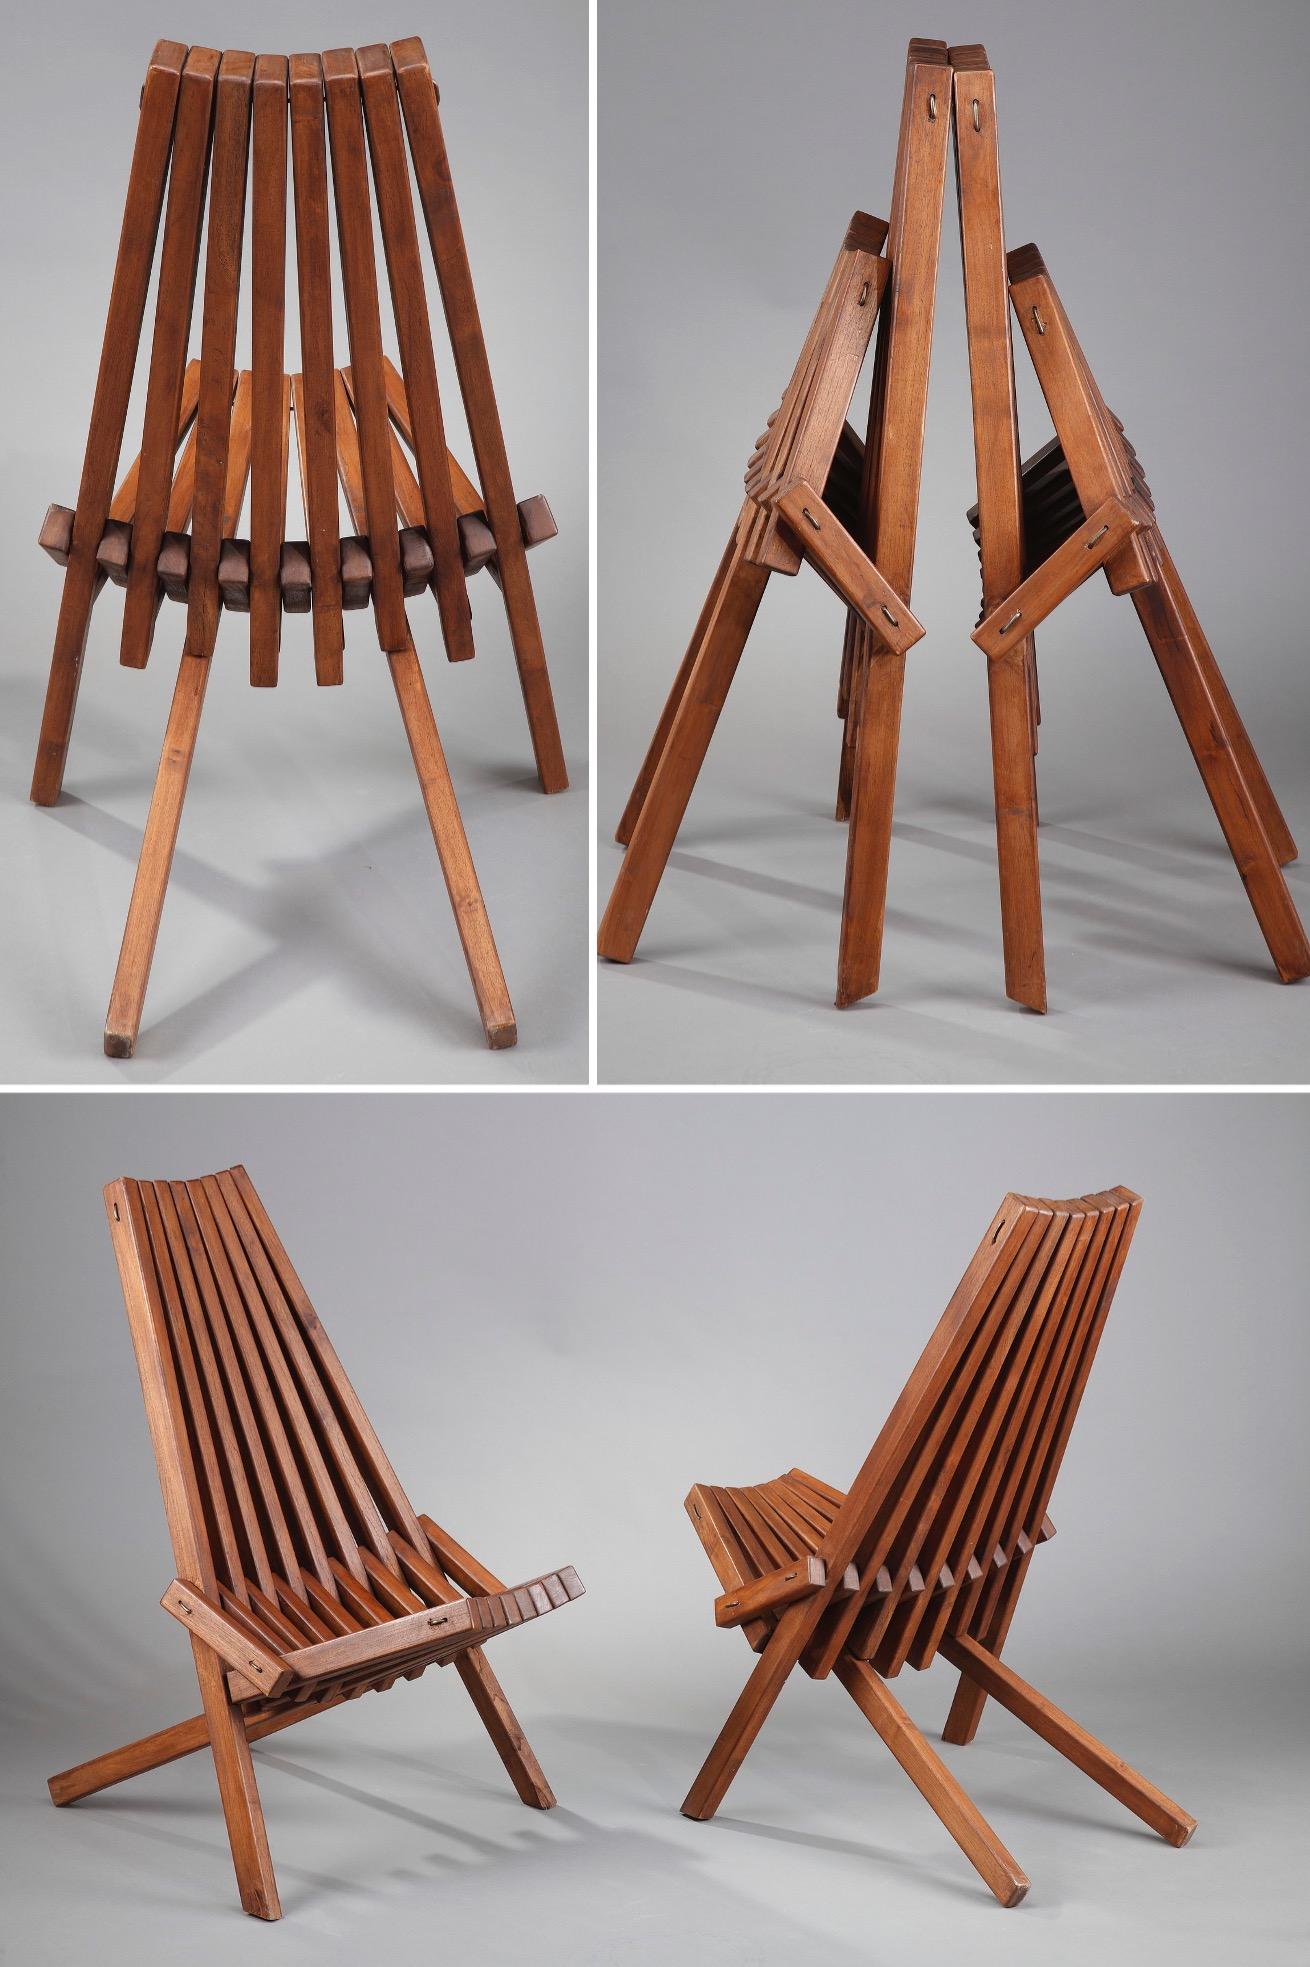 Pair of Scandinavian folding chairs made in the 60s in the spirit of Hans Wegner. Its structure entirely in teak presents a design with a sober and original aesthetic. The backrest and the seat with bars are trapezoidal and articulate around a